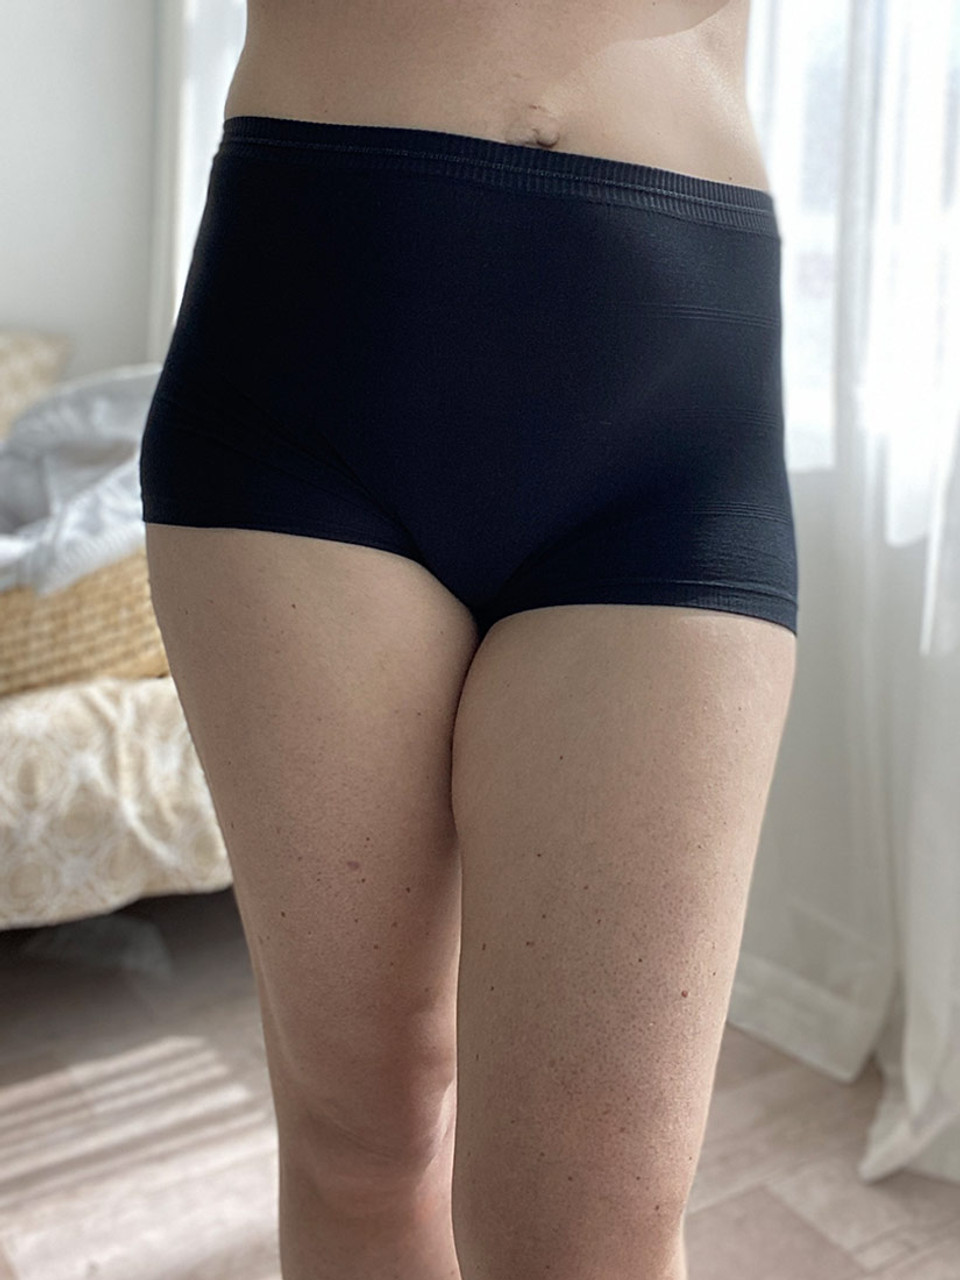 Breastmates Postpartum Undies for after labour - the Best Granny Pants you  can find!